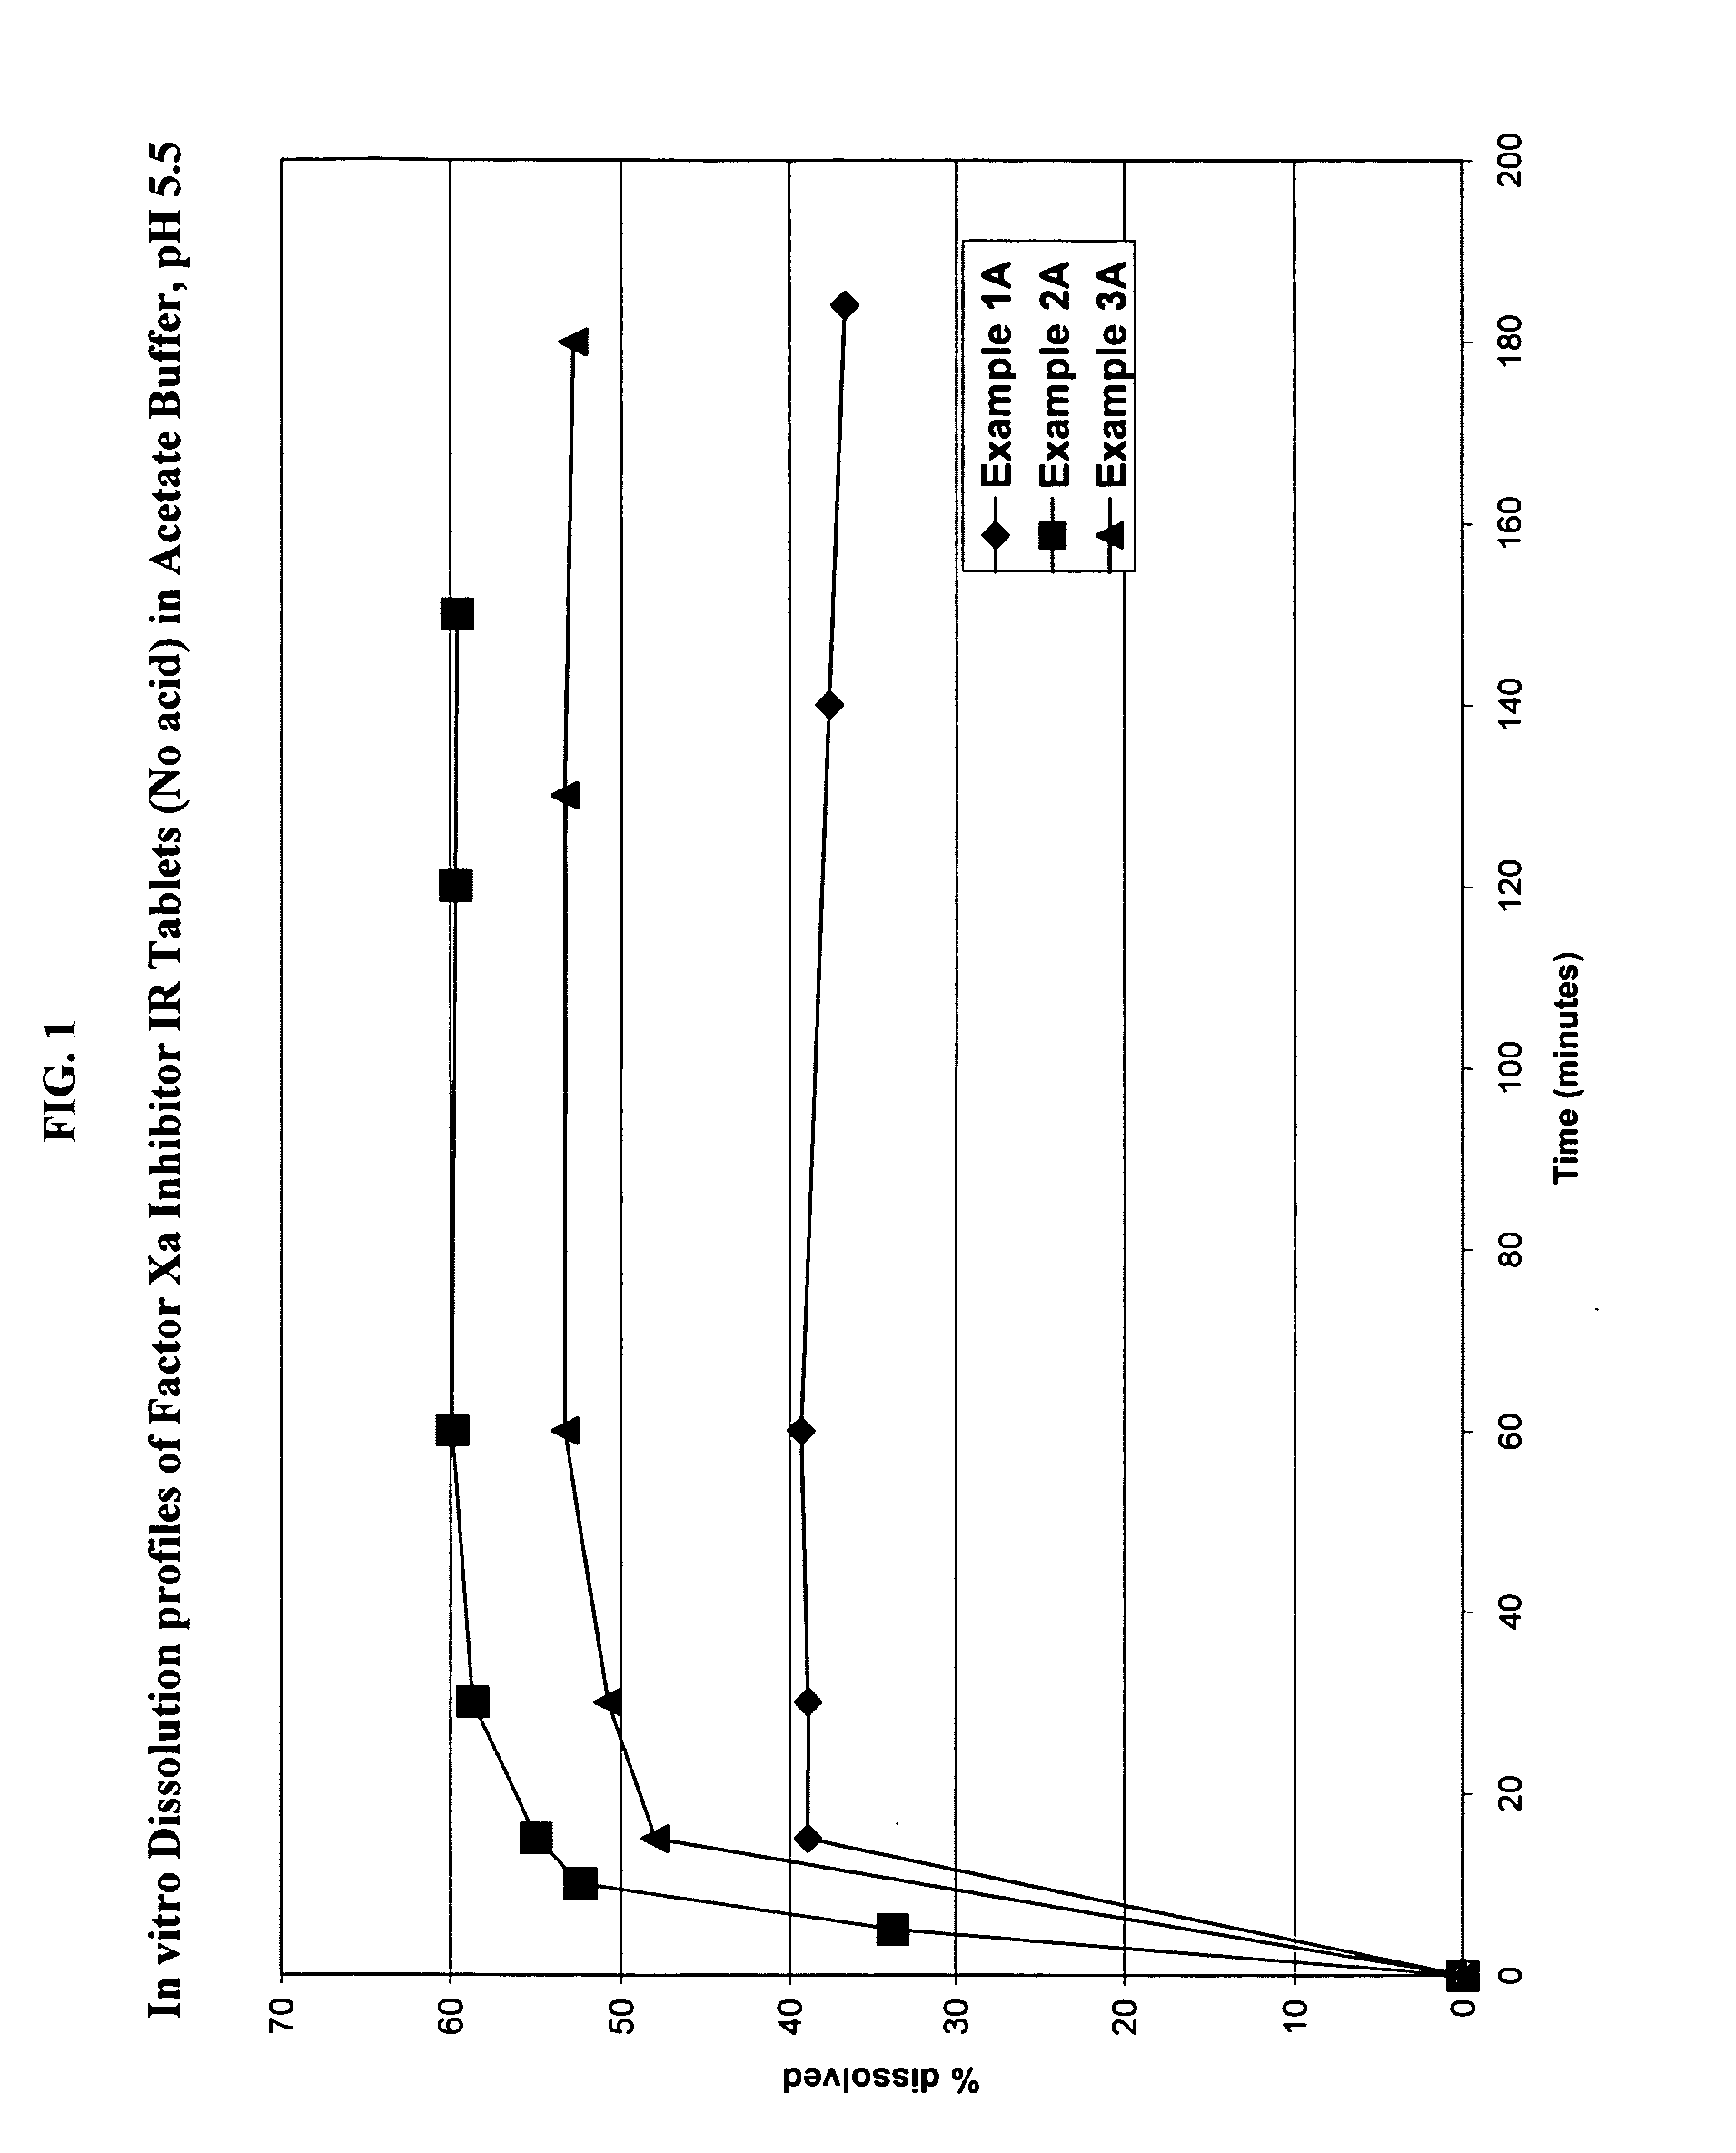 Solid dosage formulation containing a Factor Xa inhibitor and method